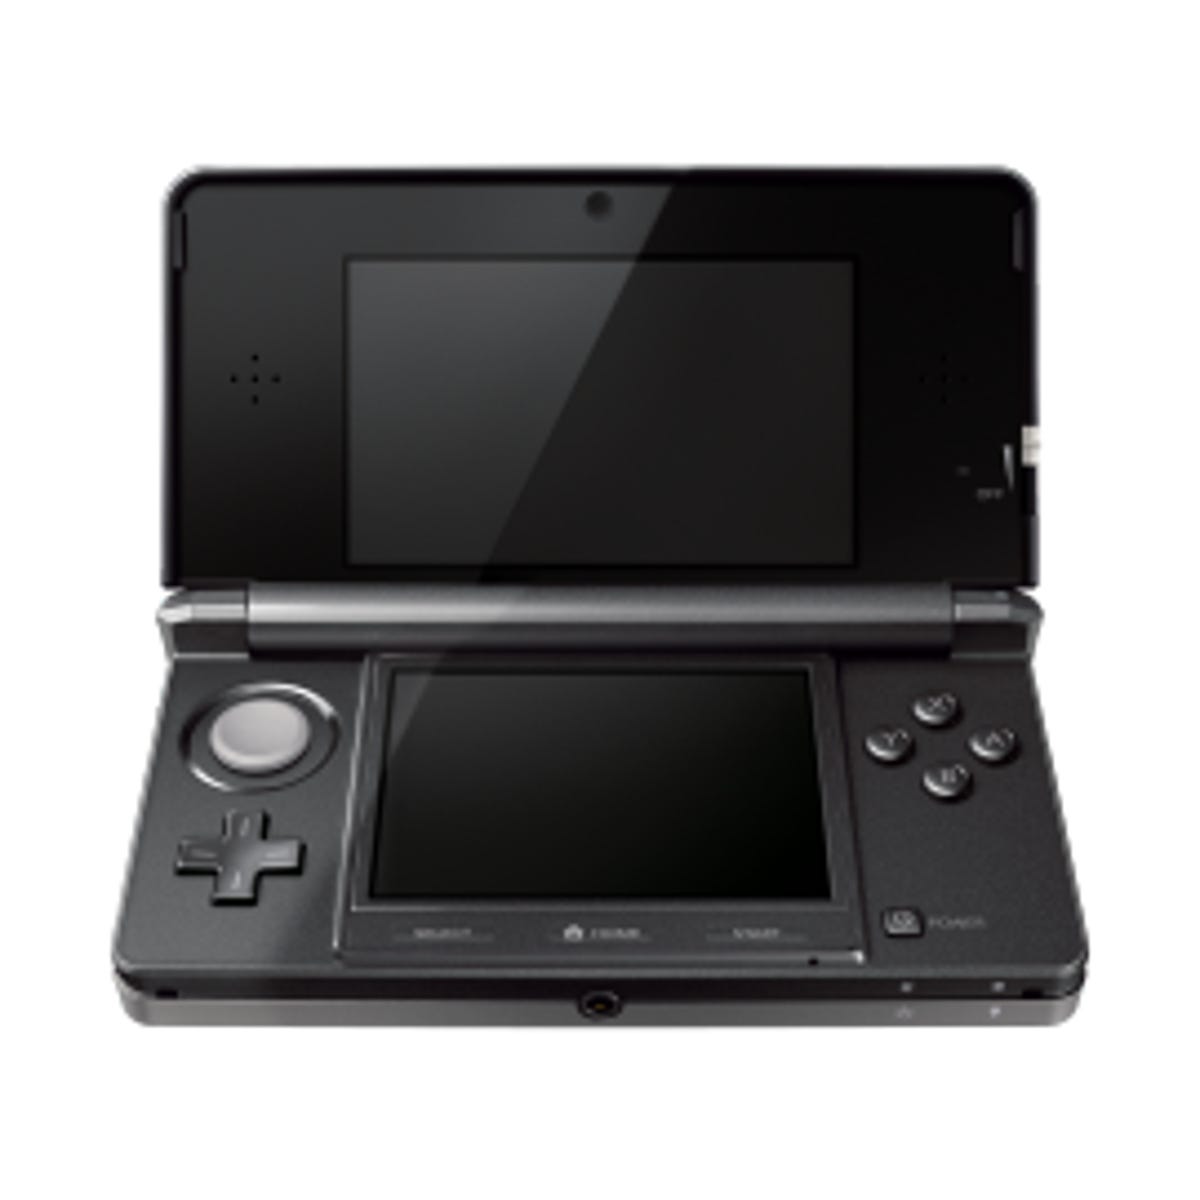 Will you be buying the 3DS?